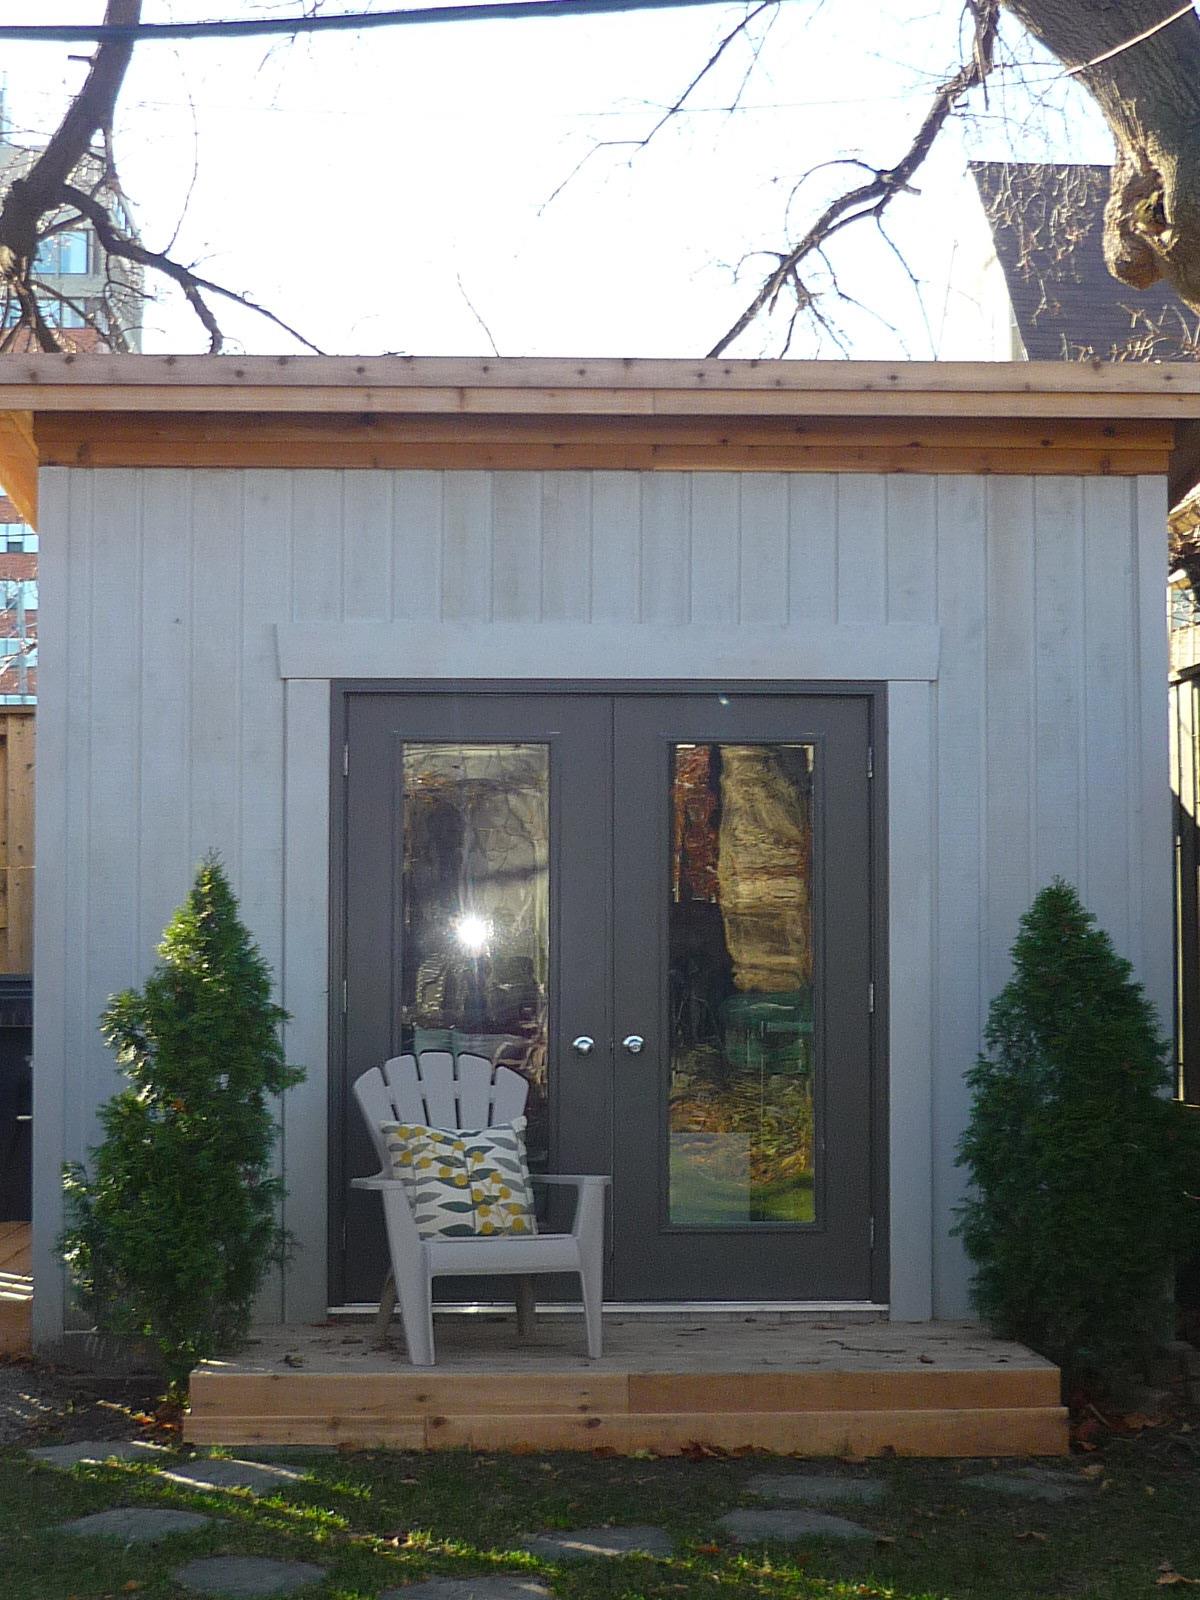 Cedar Urban Studio shed 8x12 with French double doors in Toronto, Ontario. ID number 178864-2